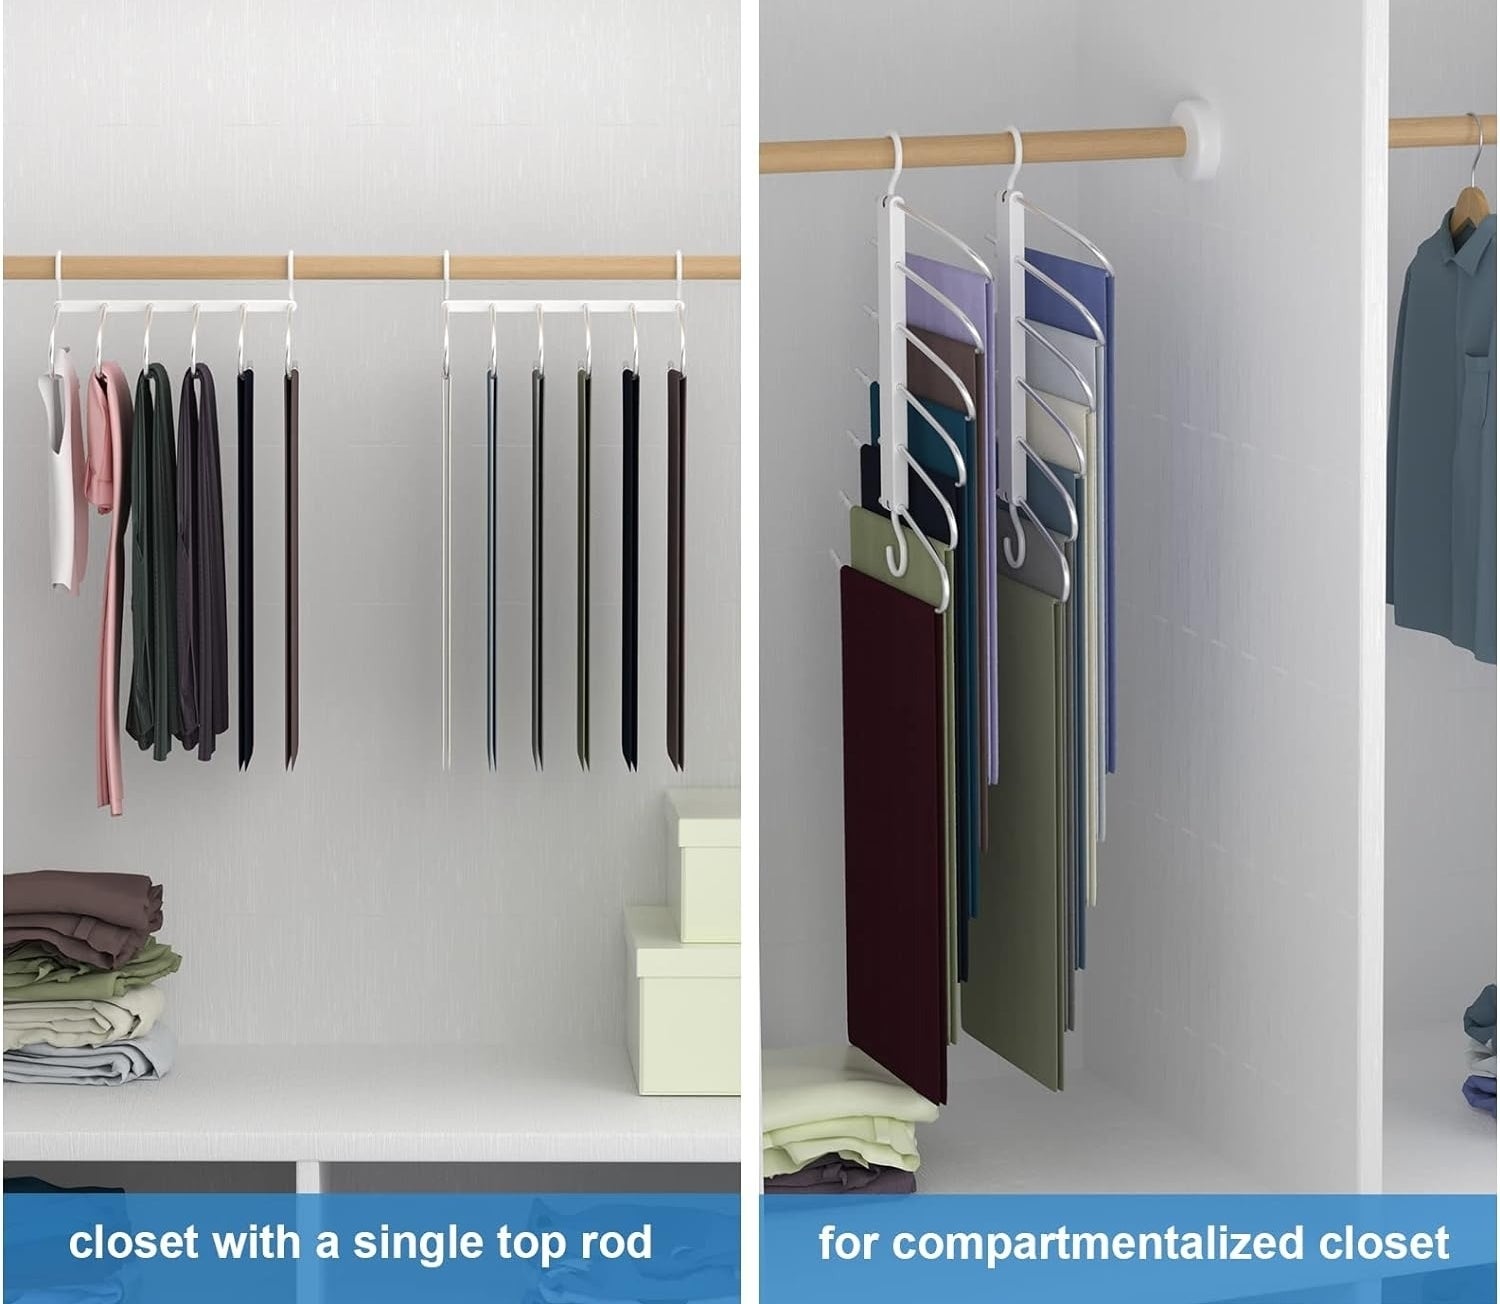 the hangers in two configurations; a closet with a single top rod and for a compartmentalized closet